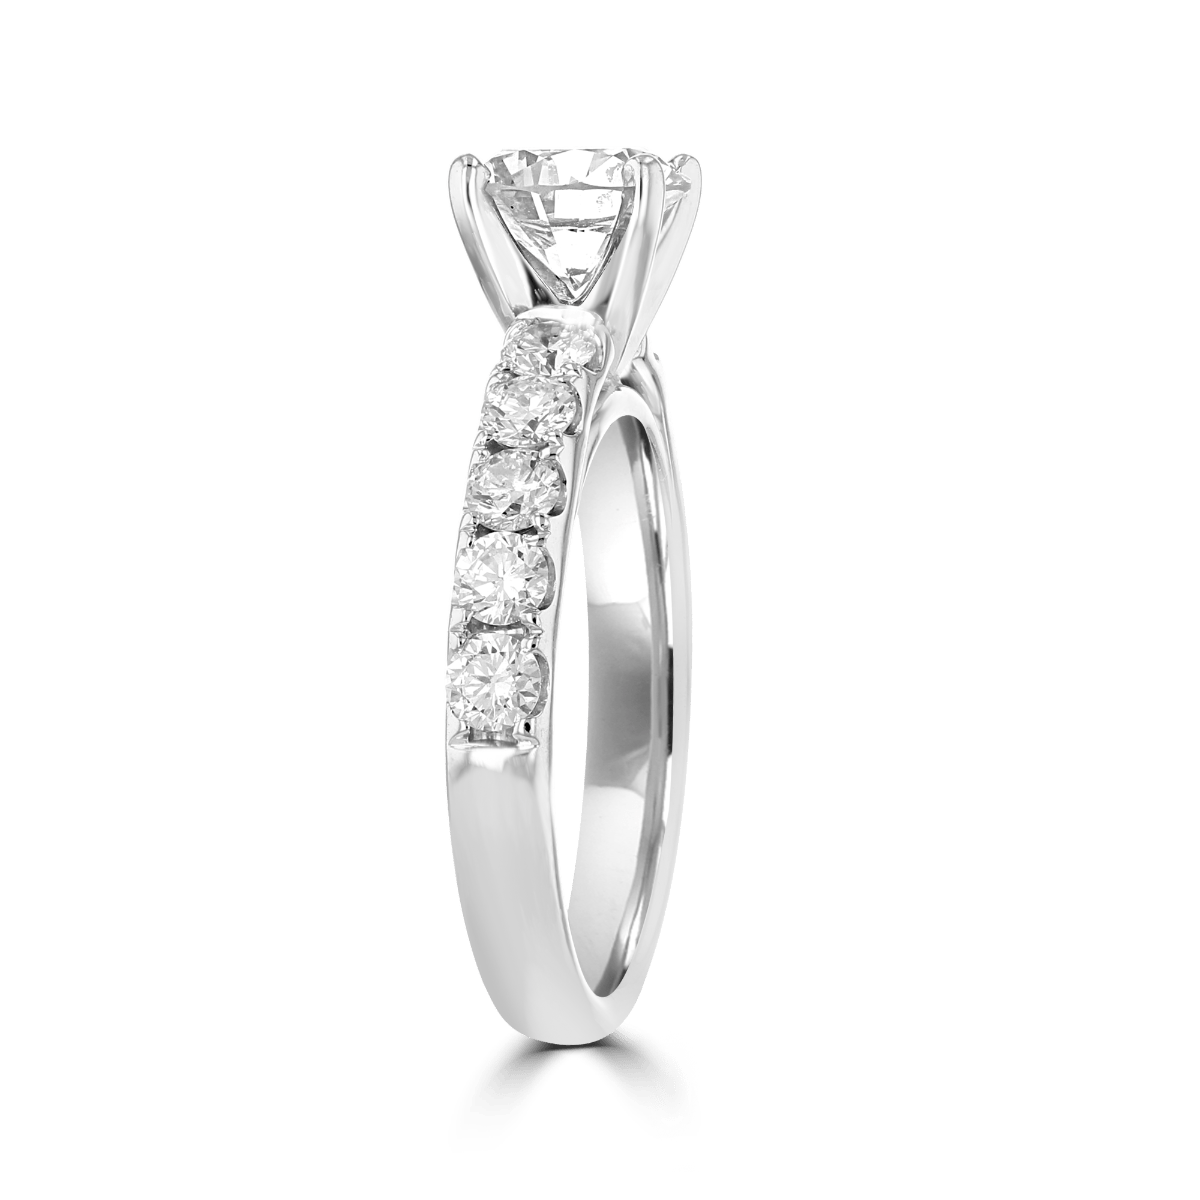 14KT 2 1/2 CTW Diamond Accent Ring With 1 3/4 Ct Round Center Diamond I1 / 4,I1 / 4.5,I1 / 5,I1 / 5.5,I1 / 6,I1 / 6.5,I1 / 7,I1 / 7.5,I1 / 8,I1 / 8.5,I1 / 9,SI / 4,SI / 4.5,SI / 5,SI / 5.5,SI / 6,SI / 6.5,SI / 7,SI / 7.5,SI / 8,SI / 8.5,SI / 9,VS / 4,VS / 4.5,VS / 5,VS / 5.5,VS / 6,VS / 6.5,VS / 7,VS / 7.5,VS / 8,VS / 8.5,VS / 9